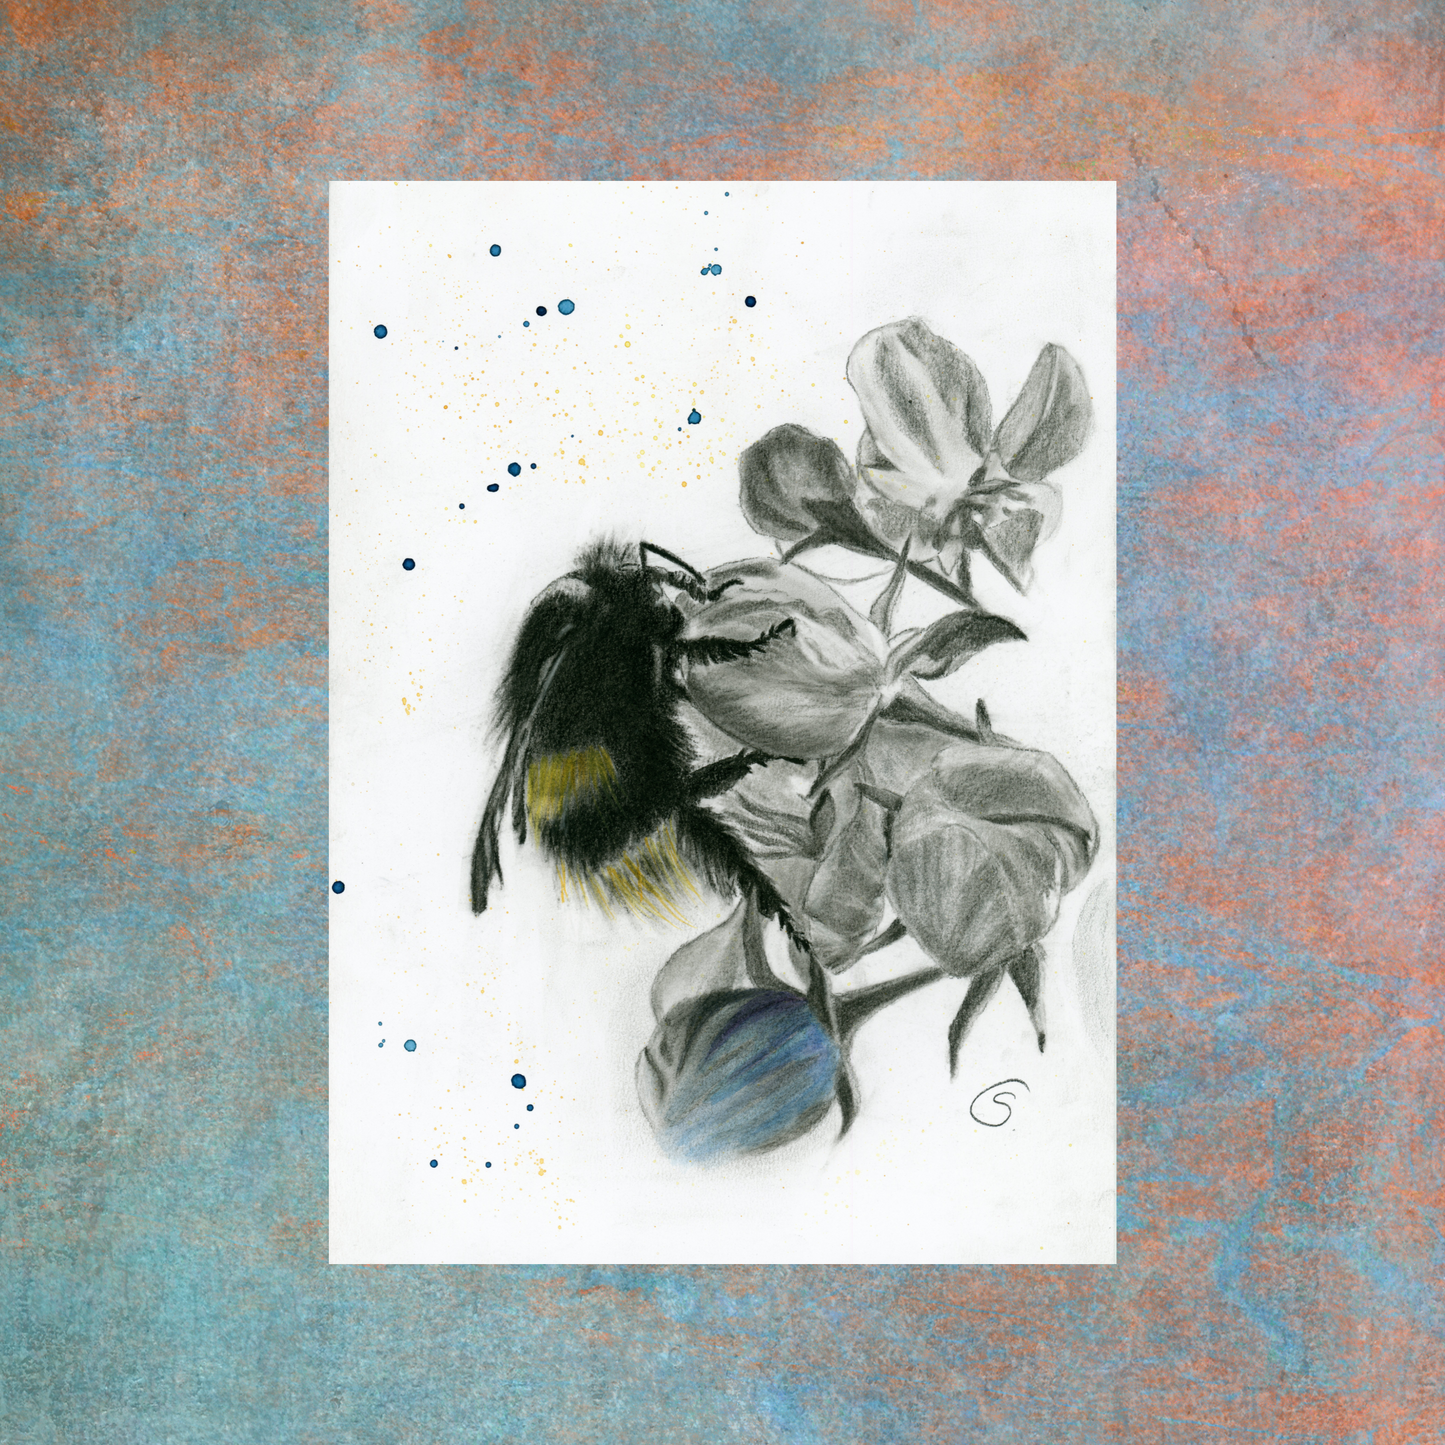 "An enchanting charcoal drawing of a whimsical bee surrounded by delicate blossoms, with light watercolor highlights. The artwork is beautifully detailed and rendered on 200 gsm acid-free paper, sized A4 (8.3" x 11.7"), and is unframed. A captivating celebration of nature's beauty."